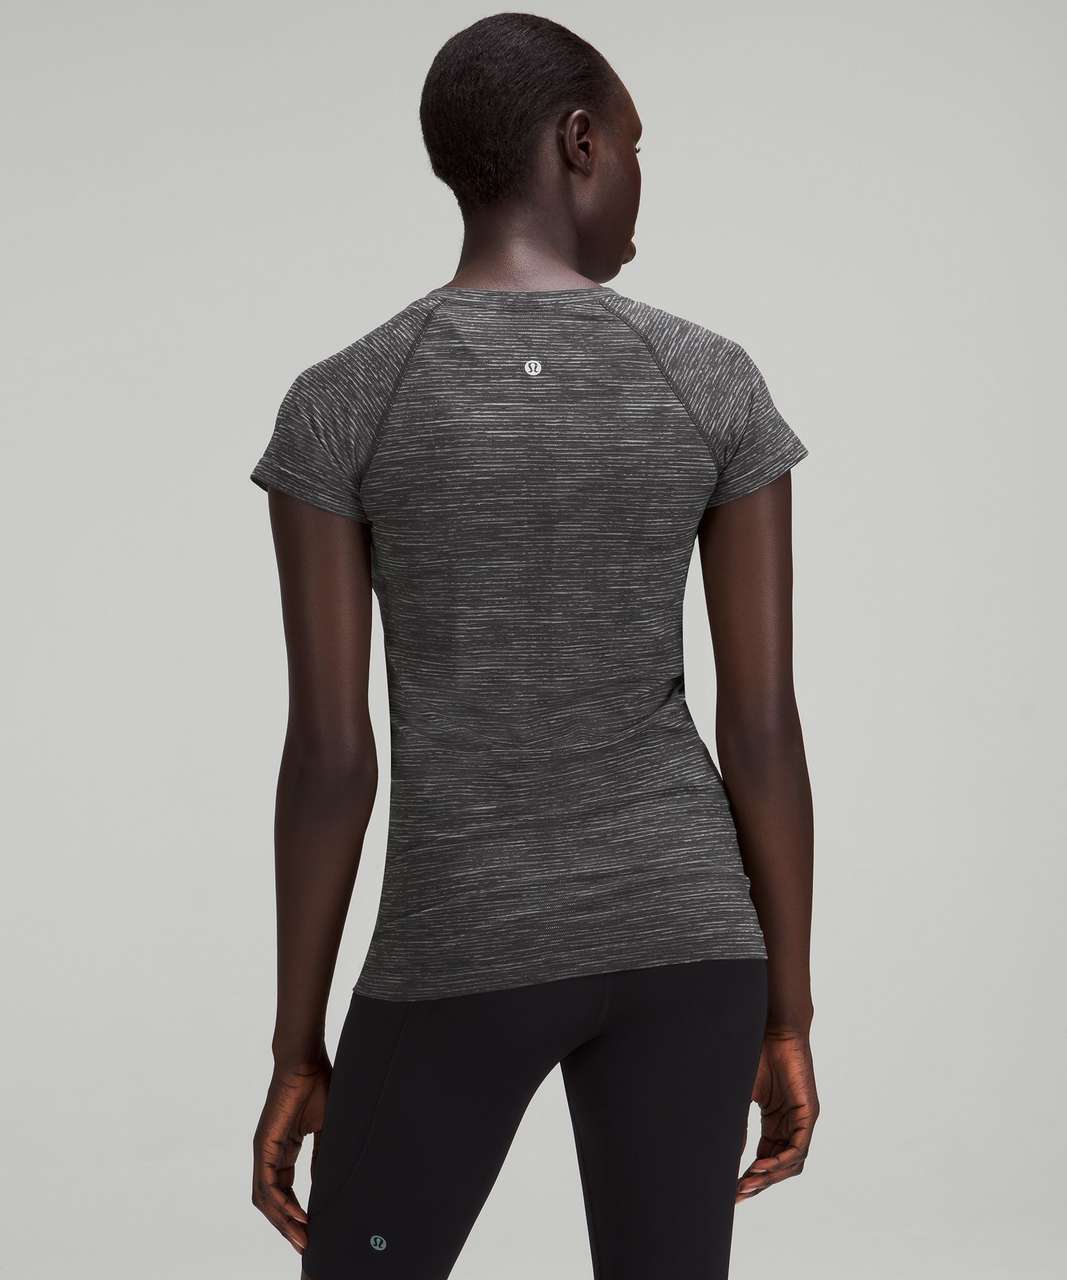 Lululemon Swiftly Tech Short Sleeve Shirt 2.0 - Wee Are From Space Graphite Grey